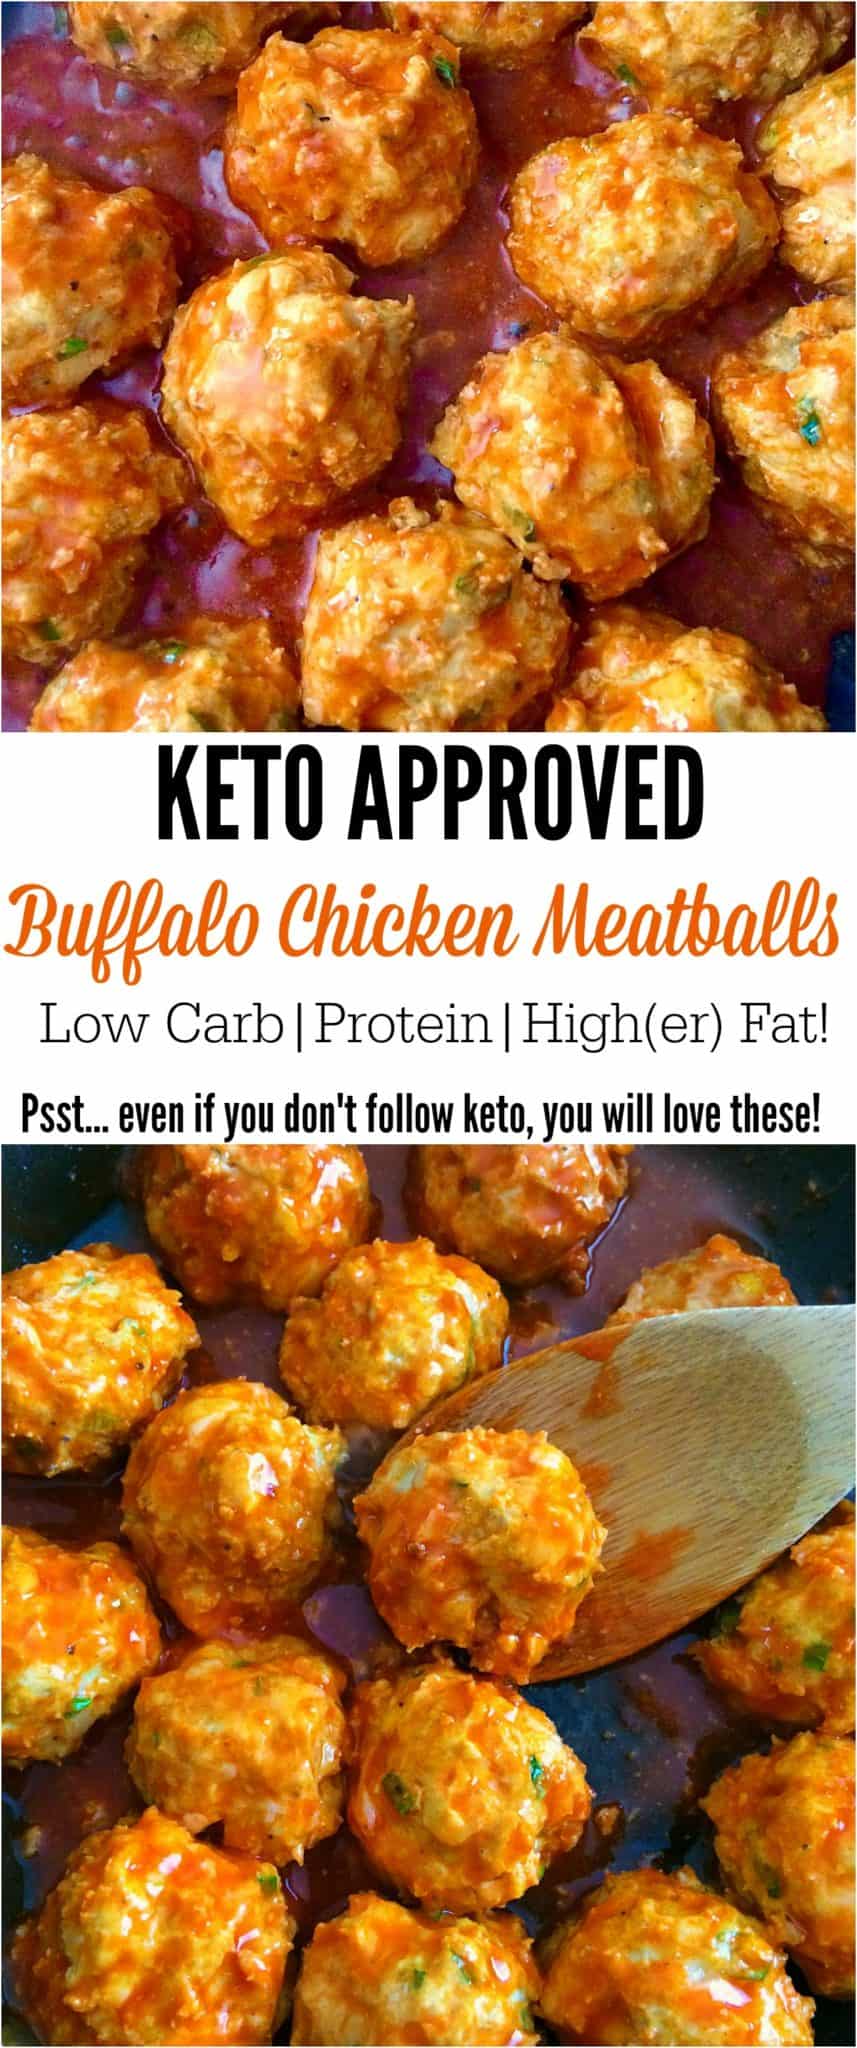 keto buffalo chicken meatballs in a collage with a spoon.